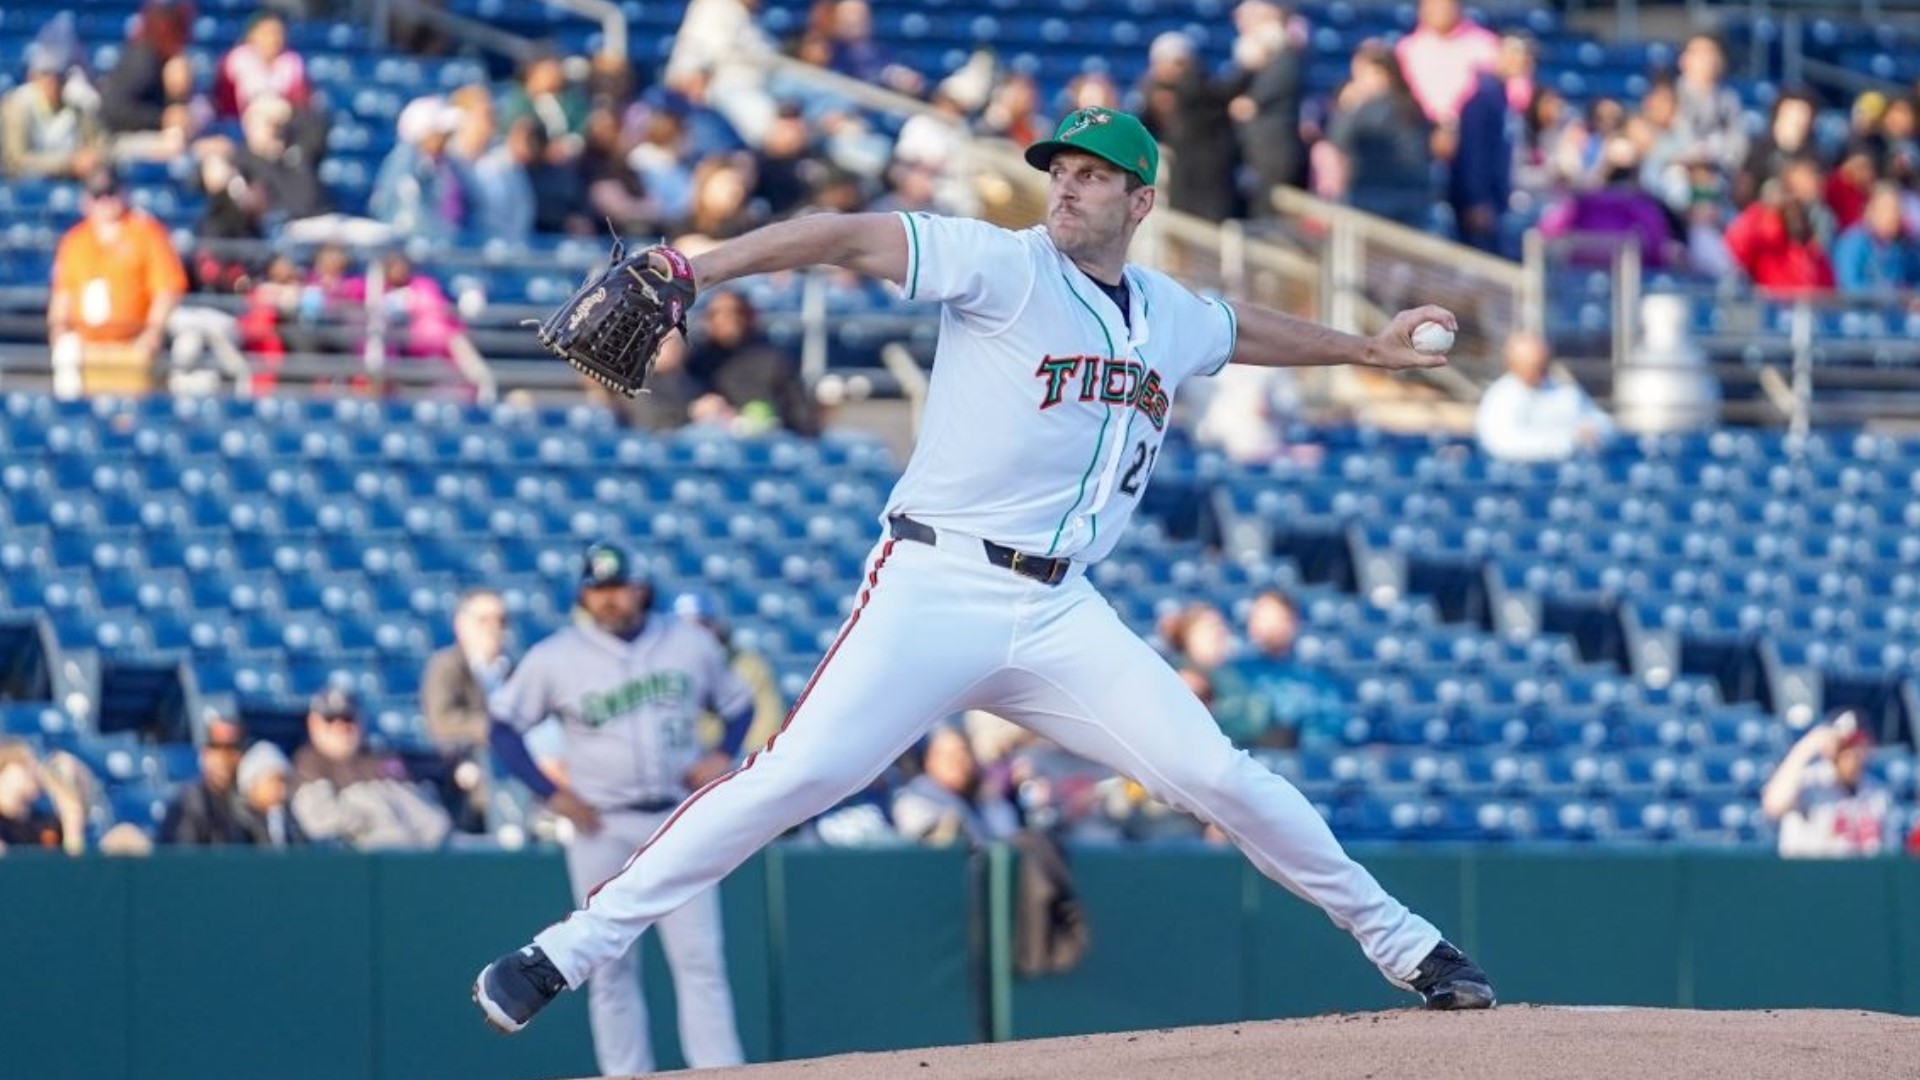 Despite getting two runners on in the 9th, the Tides couldn’t complete the comeback, dropping the opening game of the series against Gwinnett.